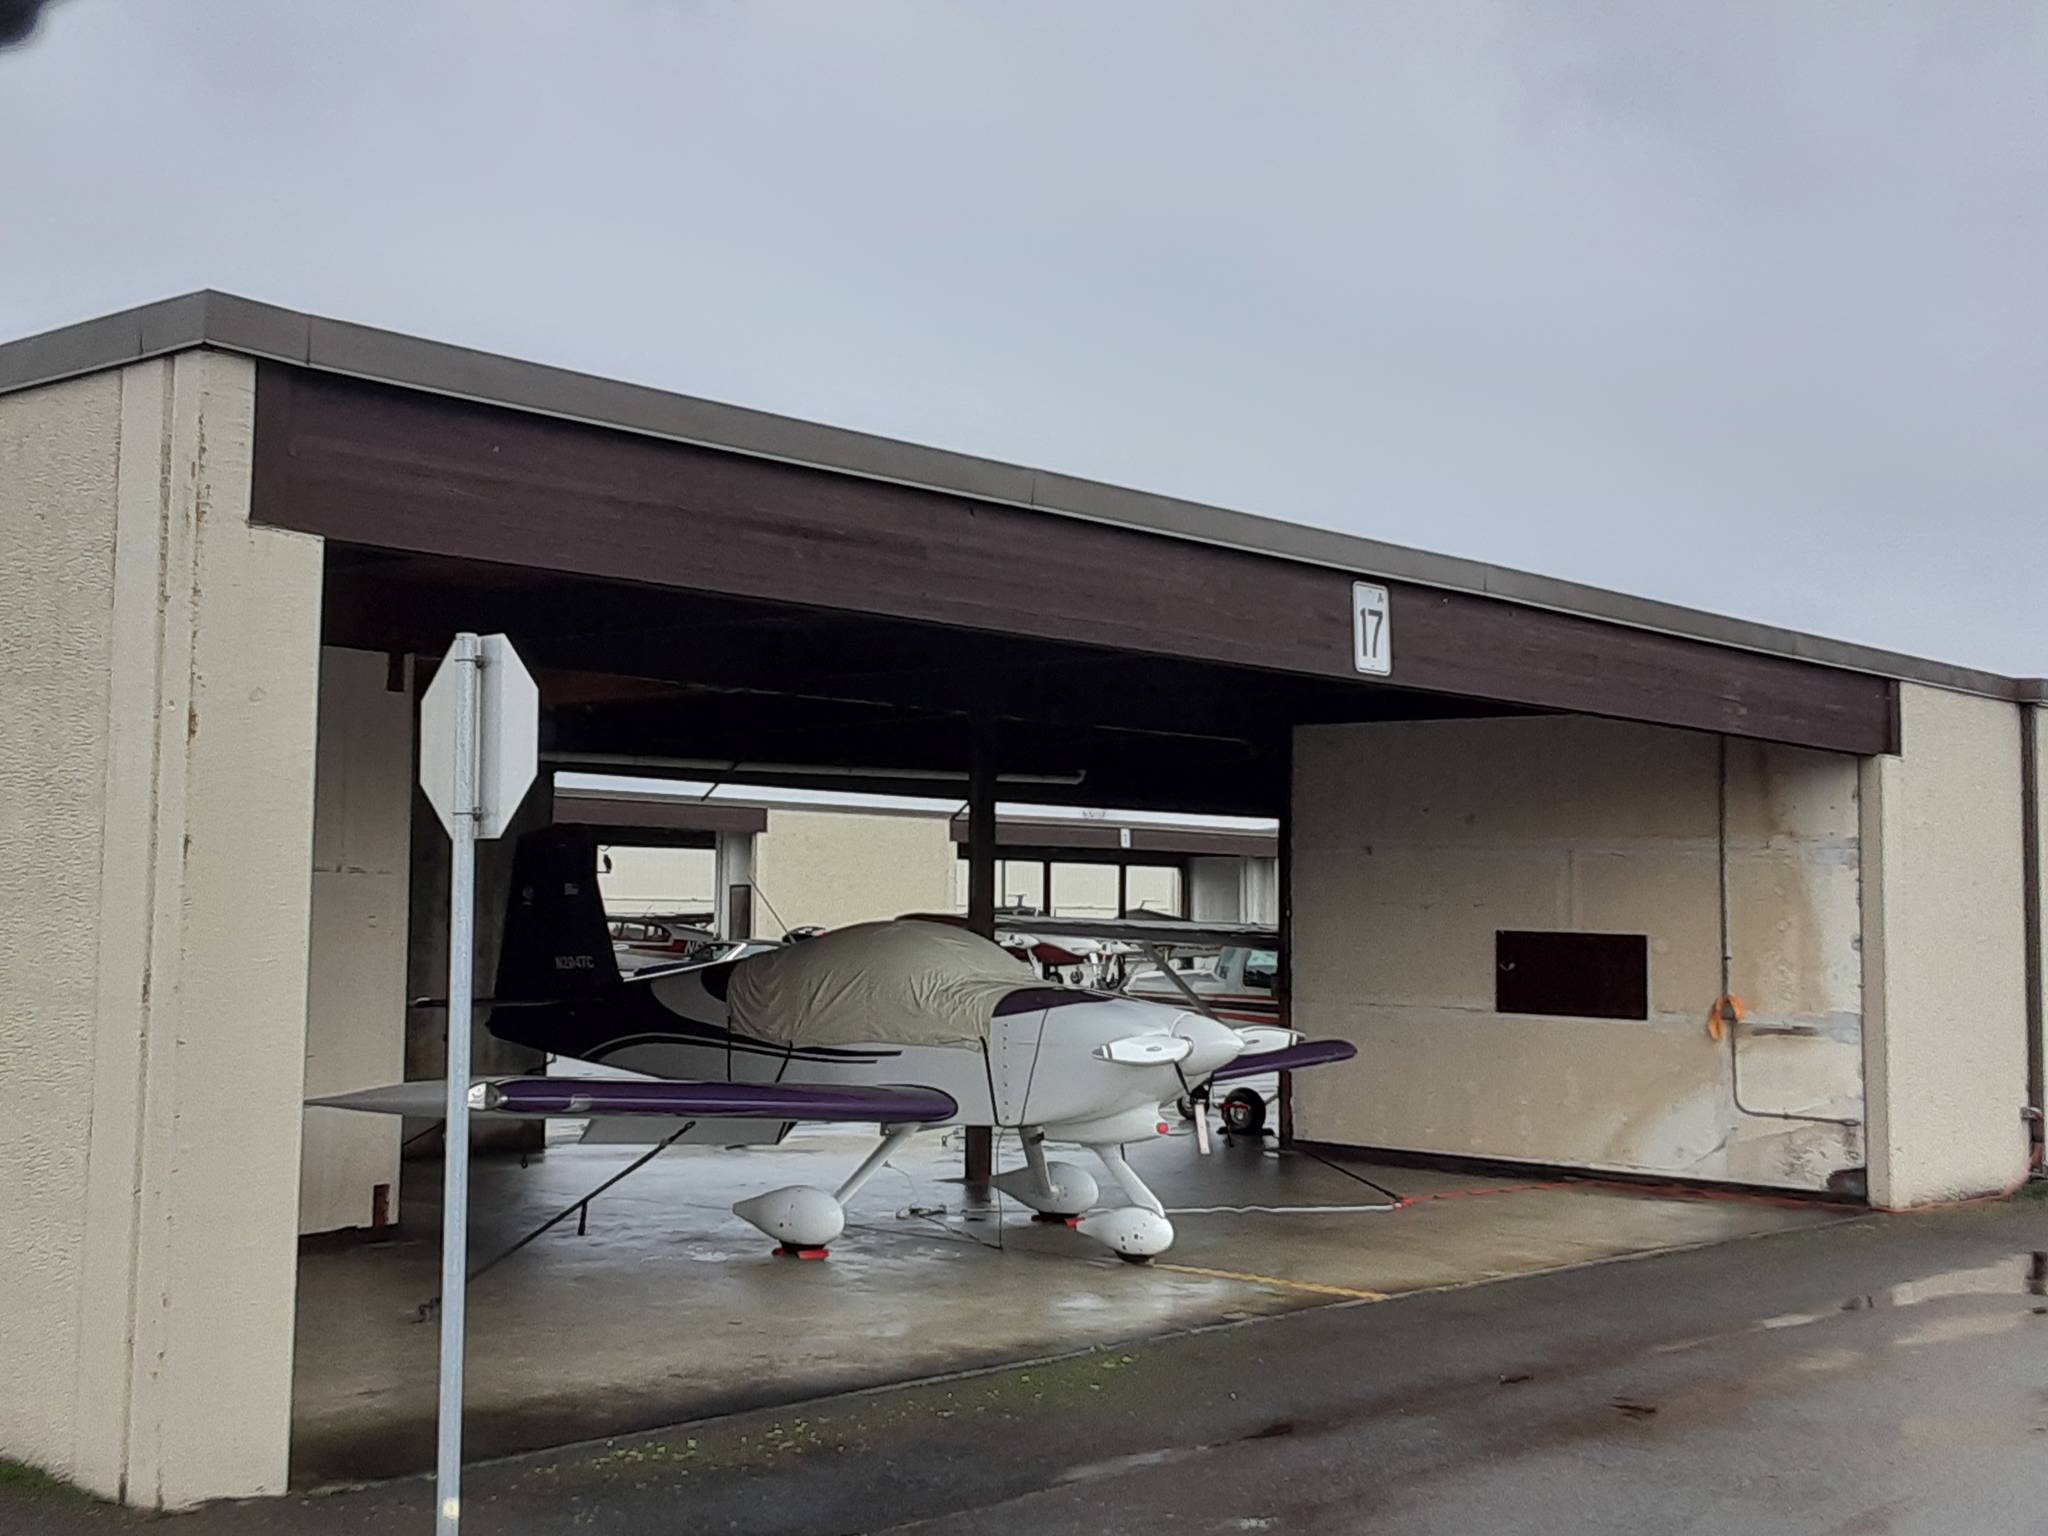 An airport developer looks to add to the Auburn Municipal Airport 17 general aviation hangars and six box hangars that will house multimillion-dollar aircraft and aviation-related businesses. Robert Whale, staff photo.